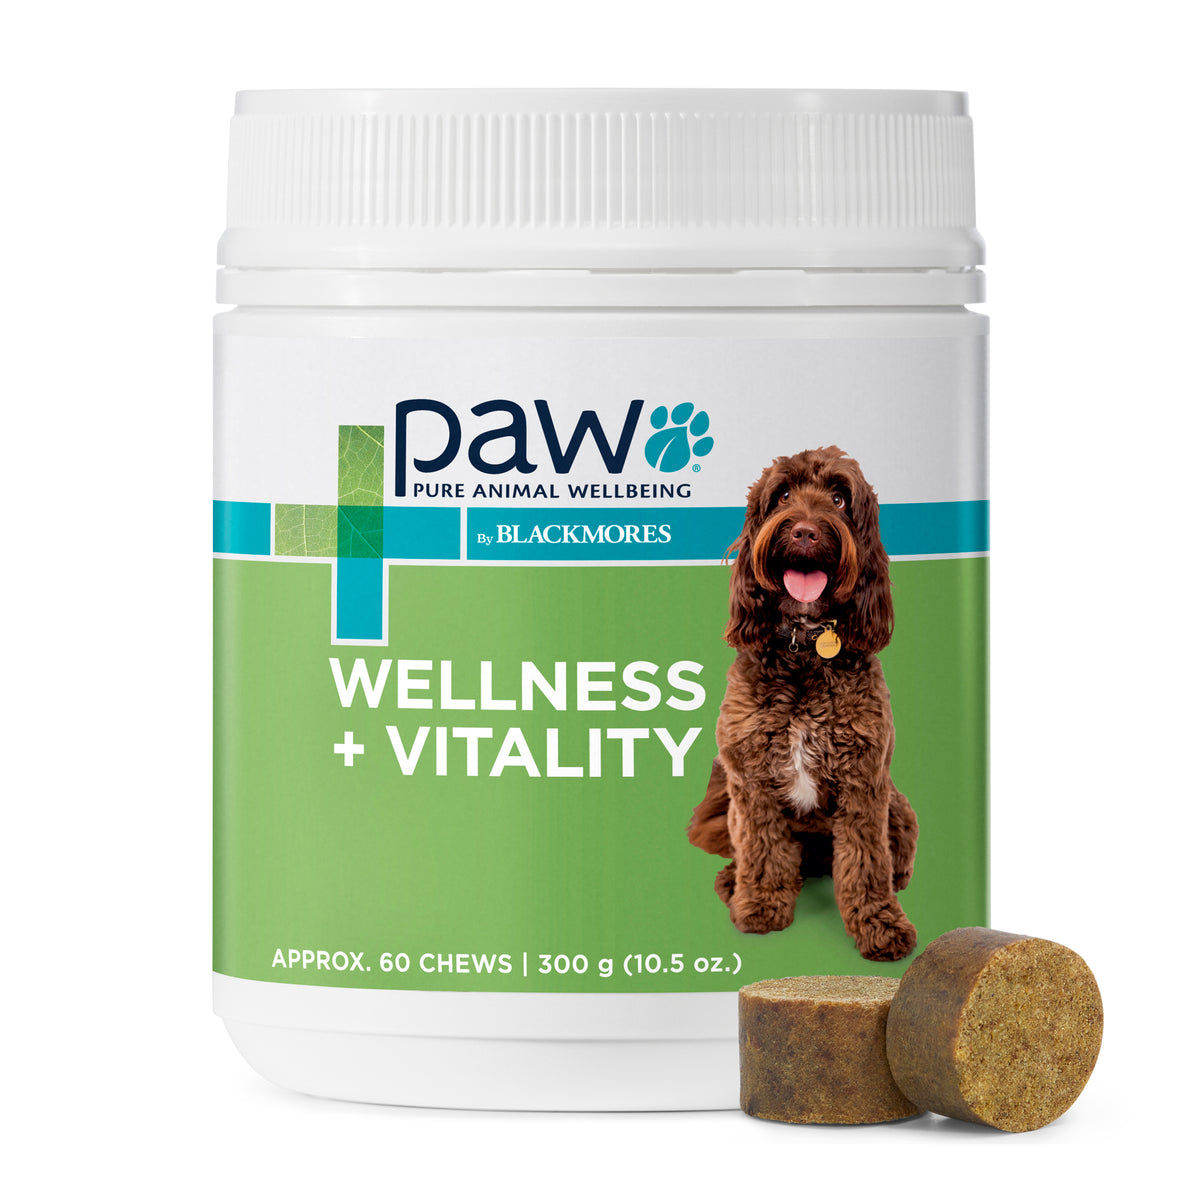 PAW by Blackmores Wellness + Vitality Multivitamin &amp; Wholefood Chews 300g